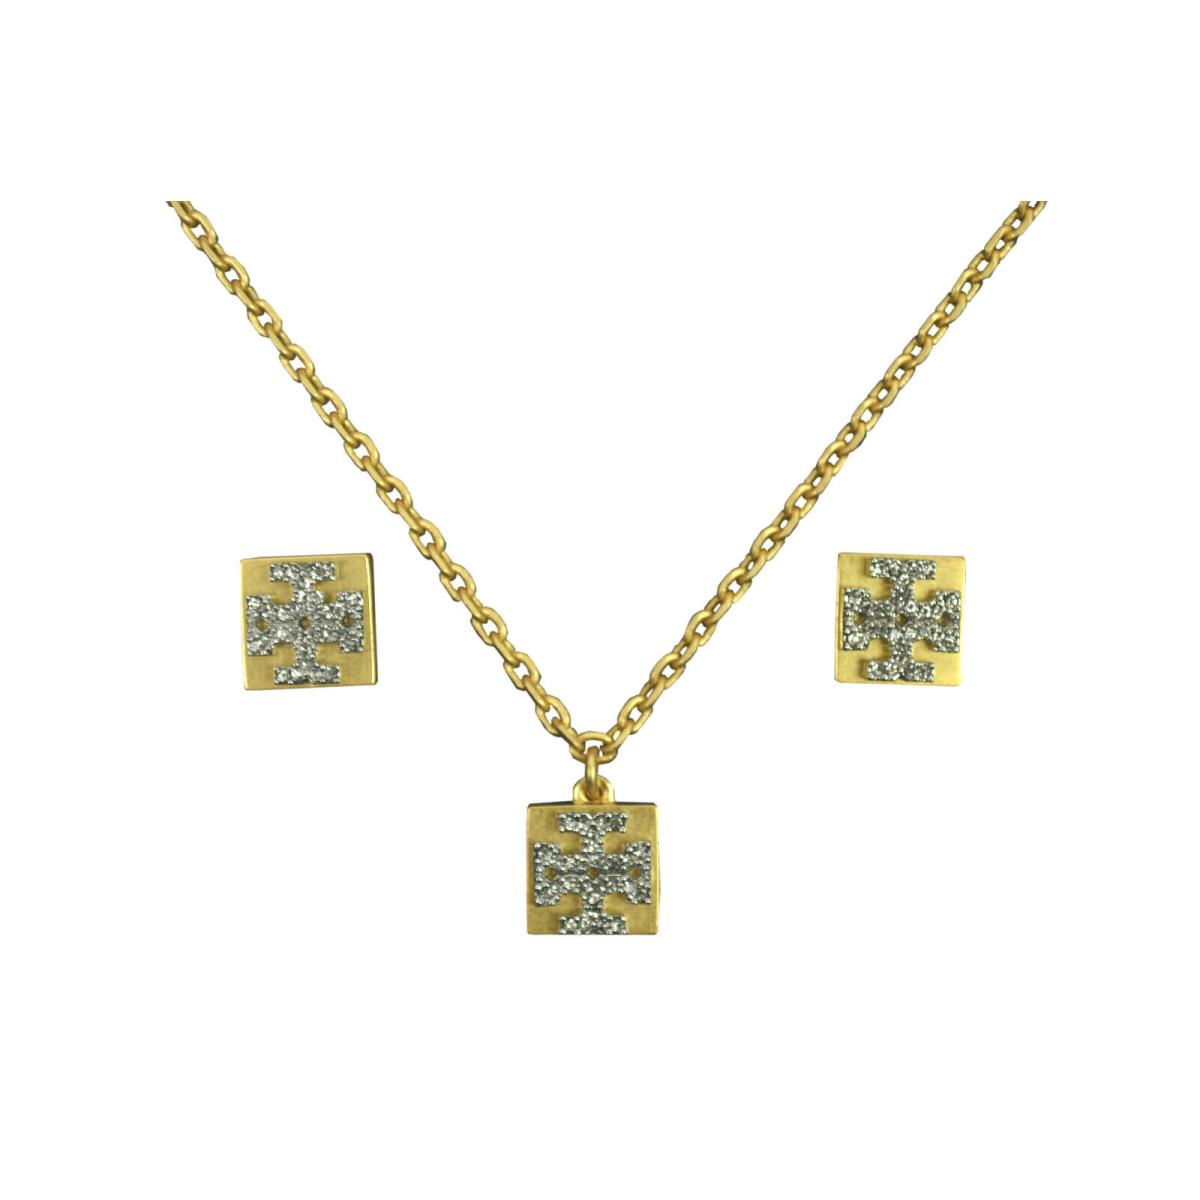 Tory Burch Womens 63899 Vintage Gold Tone T-logo Earrings Necklace Set 8179-5